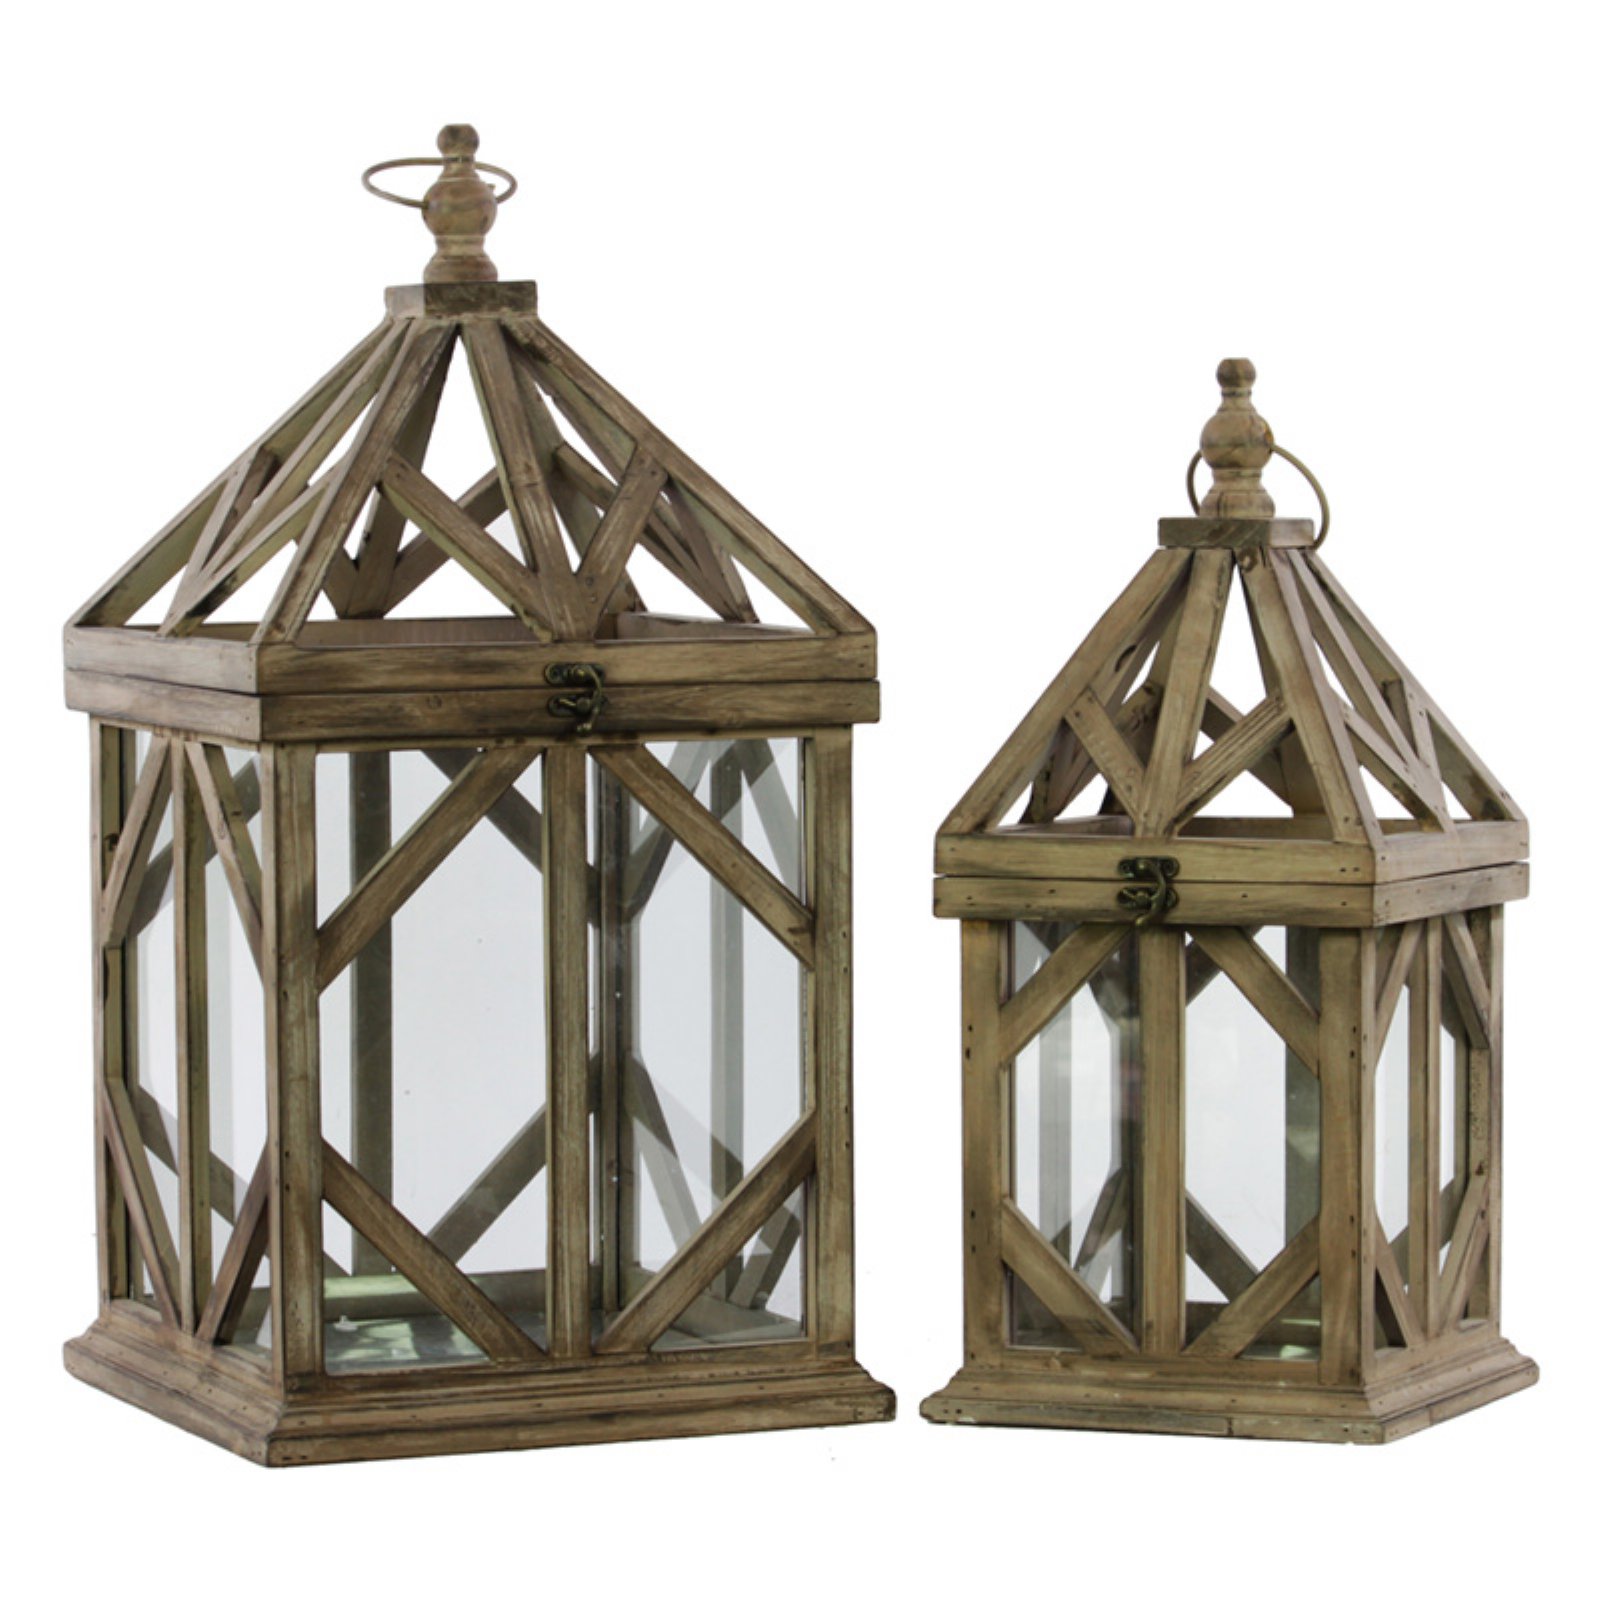 Benzara Wood Lantern with Metal Handle and Glass Sides- Set of 2 - image 1 of 1